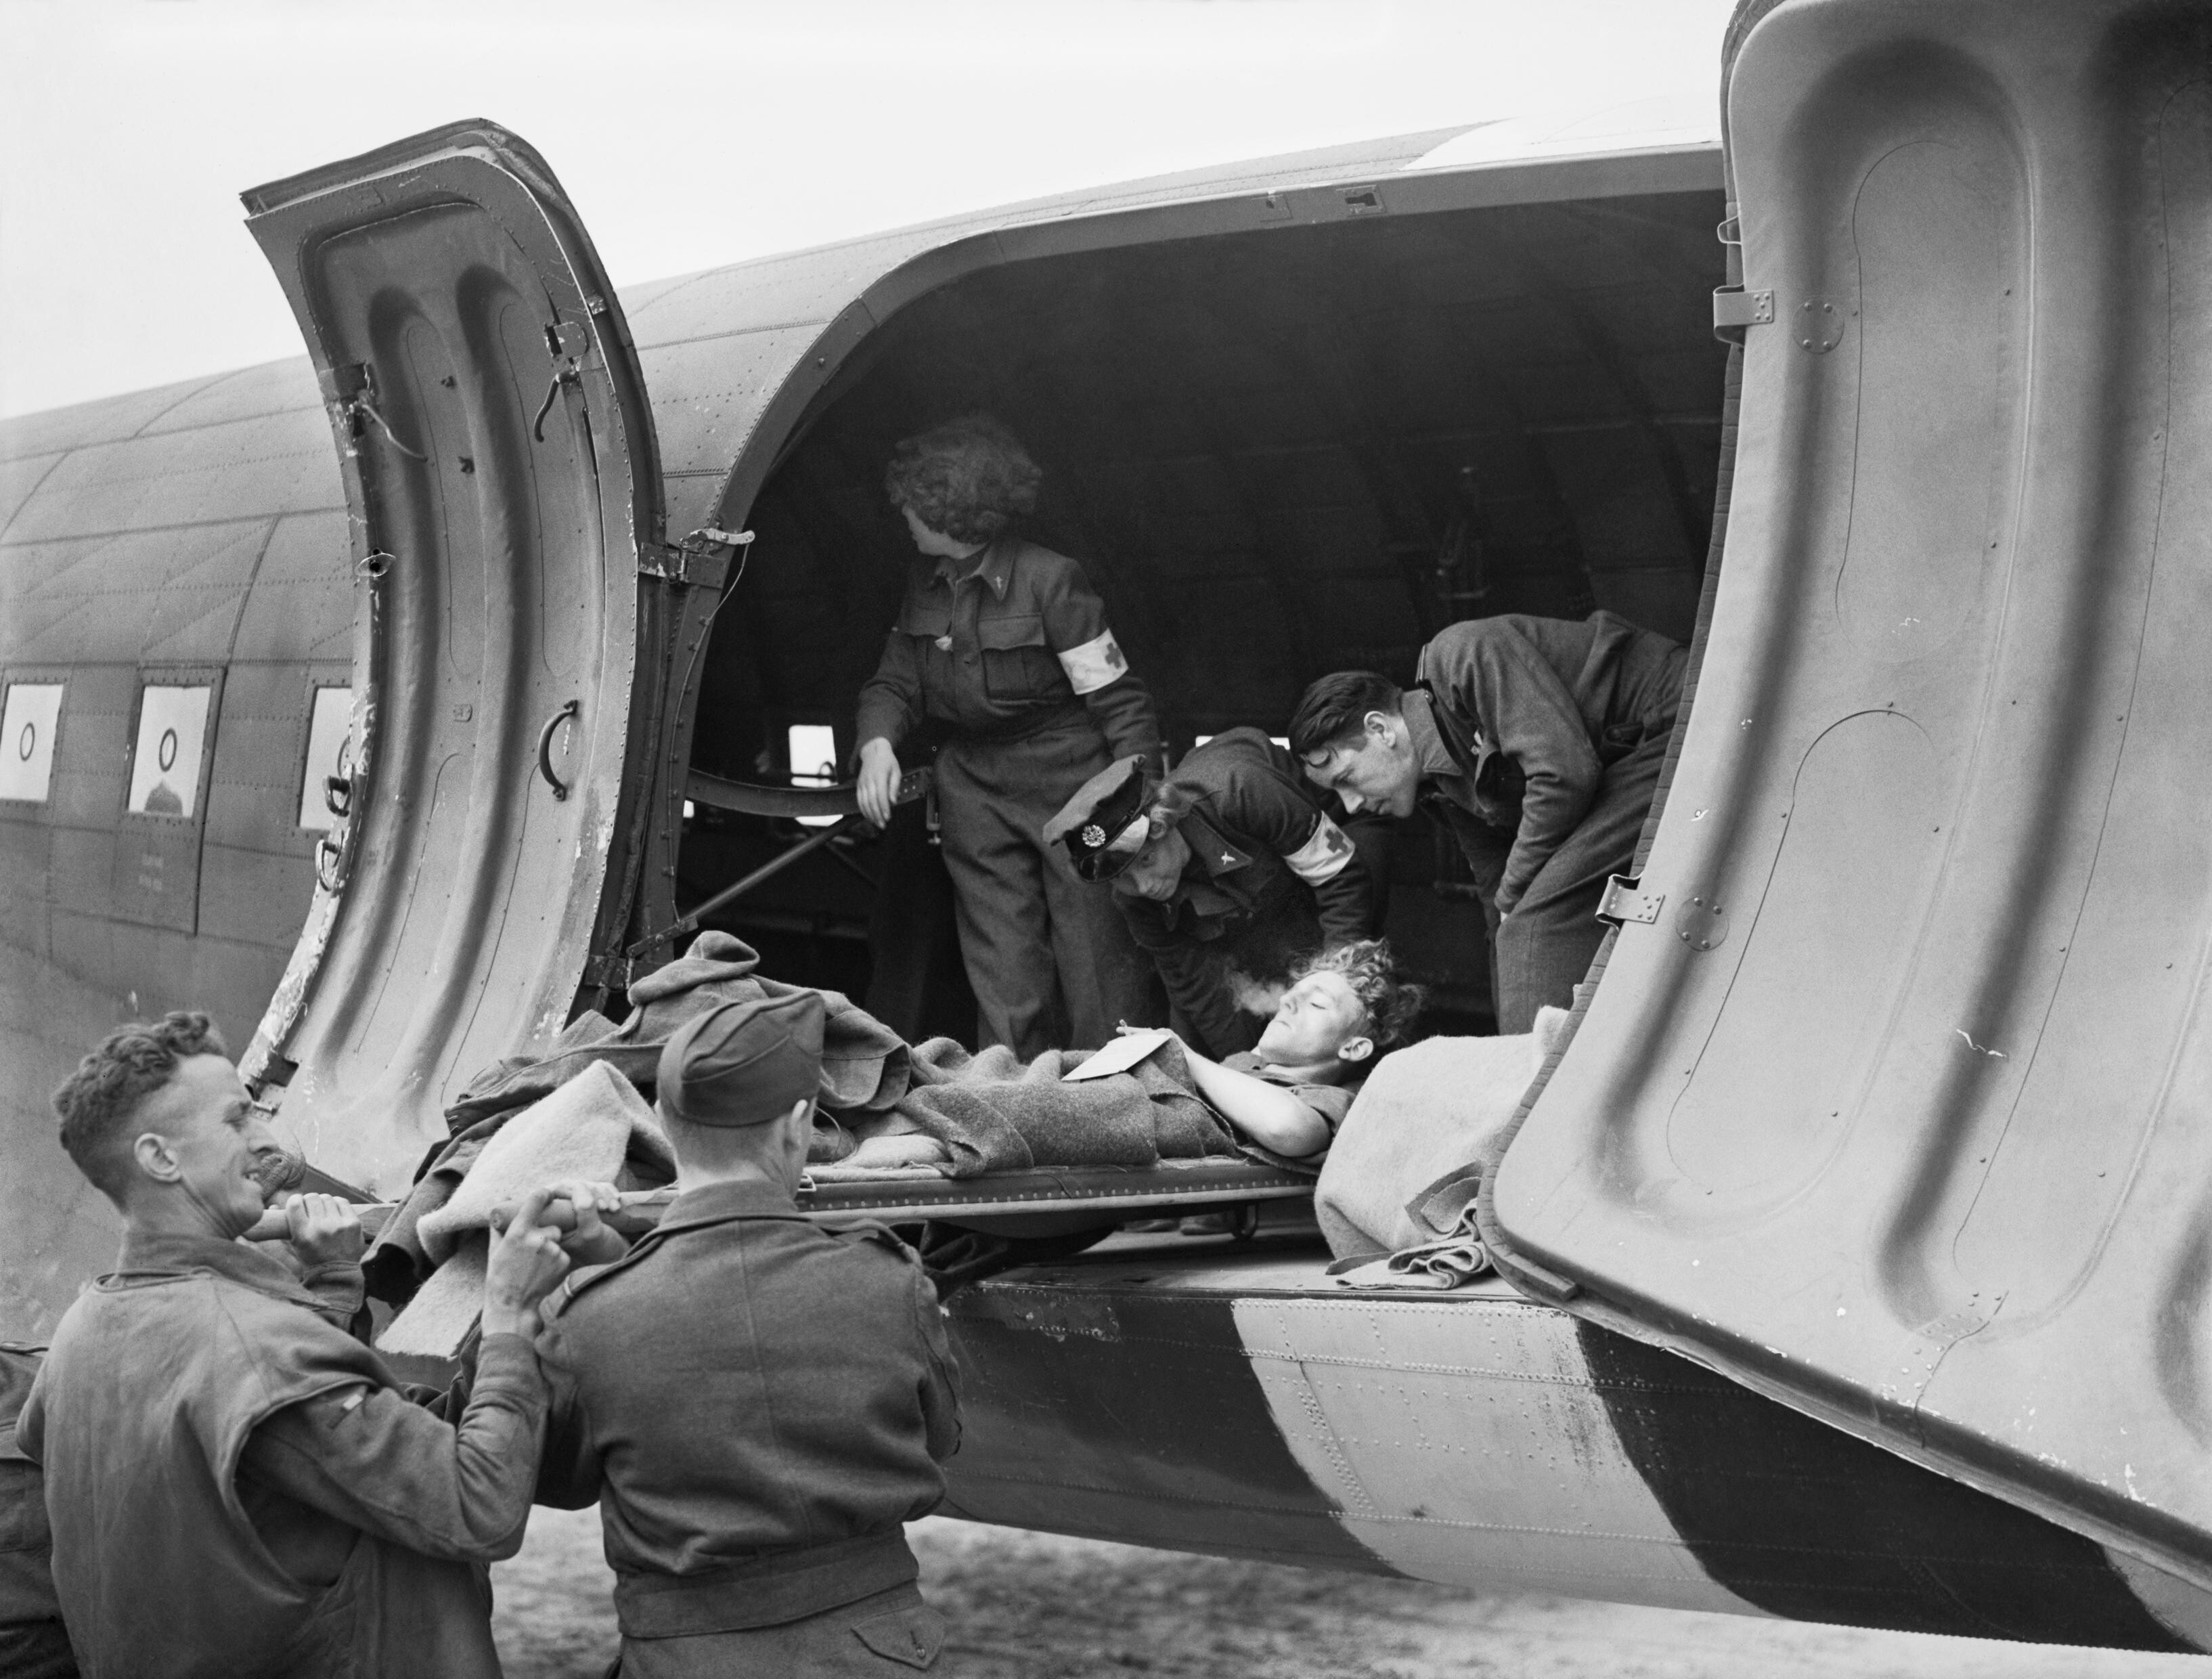 RAF air crew and WAAF nursing orderlies loading a wounded serviceman onto a Dakota Mark III aircraft of No. 233 Squadron RAF at B-2 Bazenville Advanced Landing Ground, Basse-Normandie, France, mid-Jun 1944